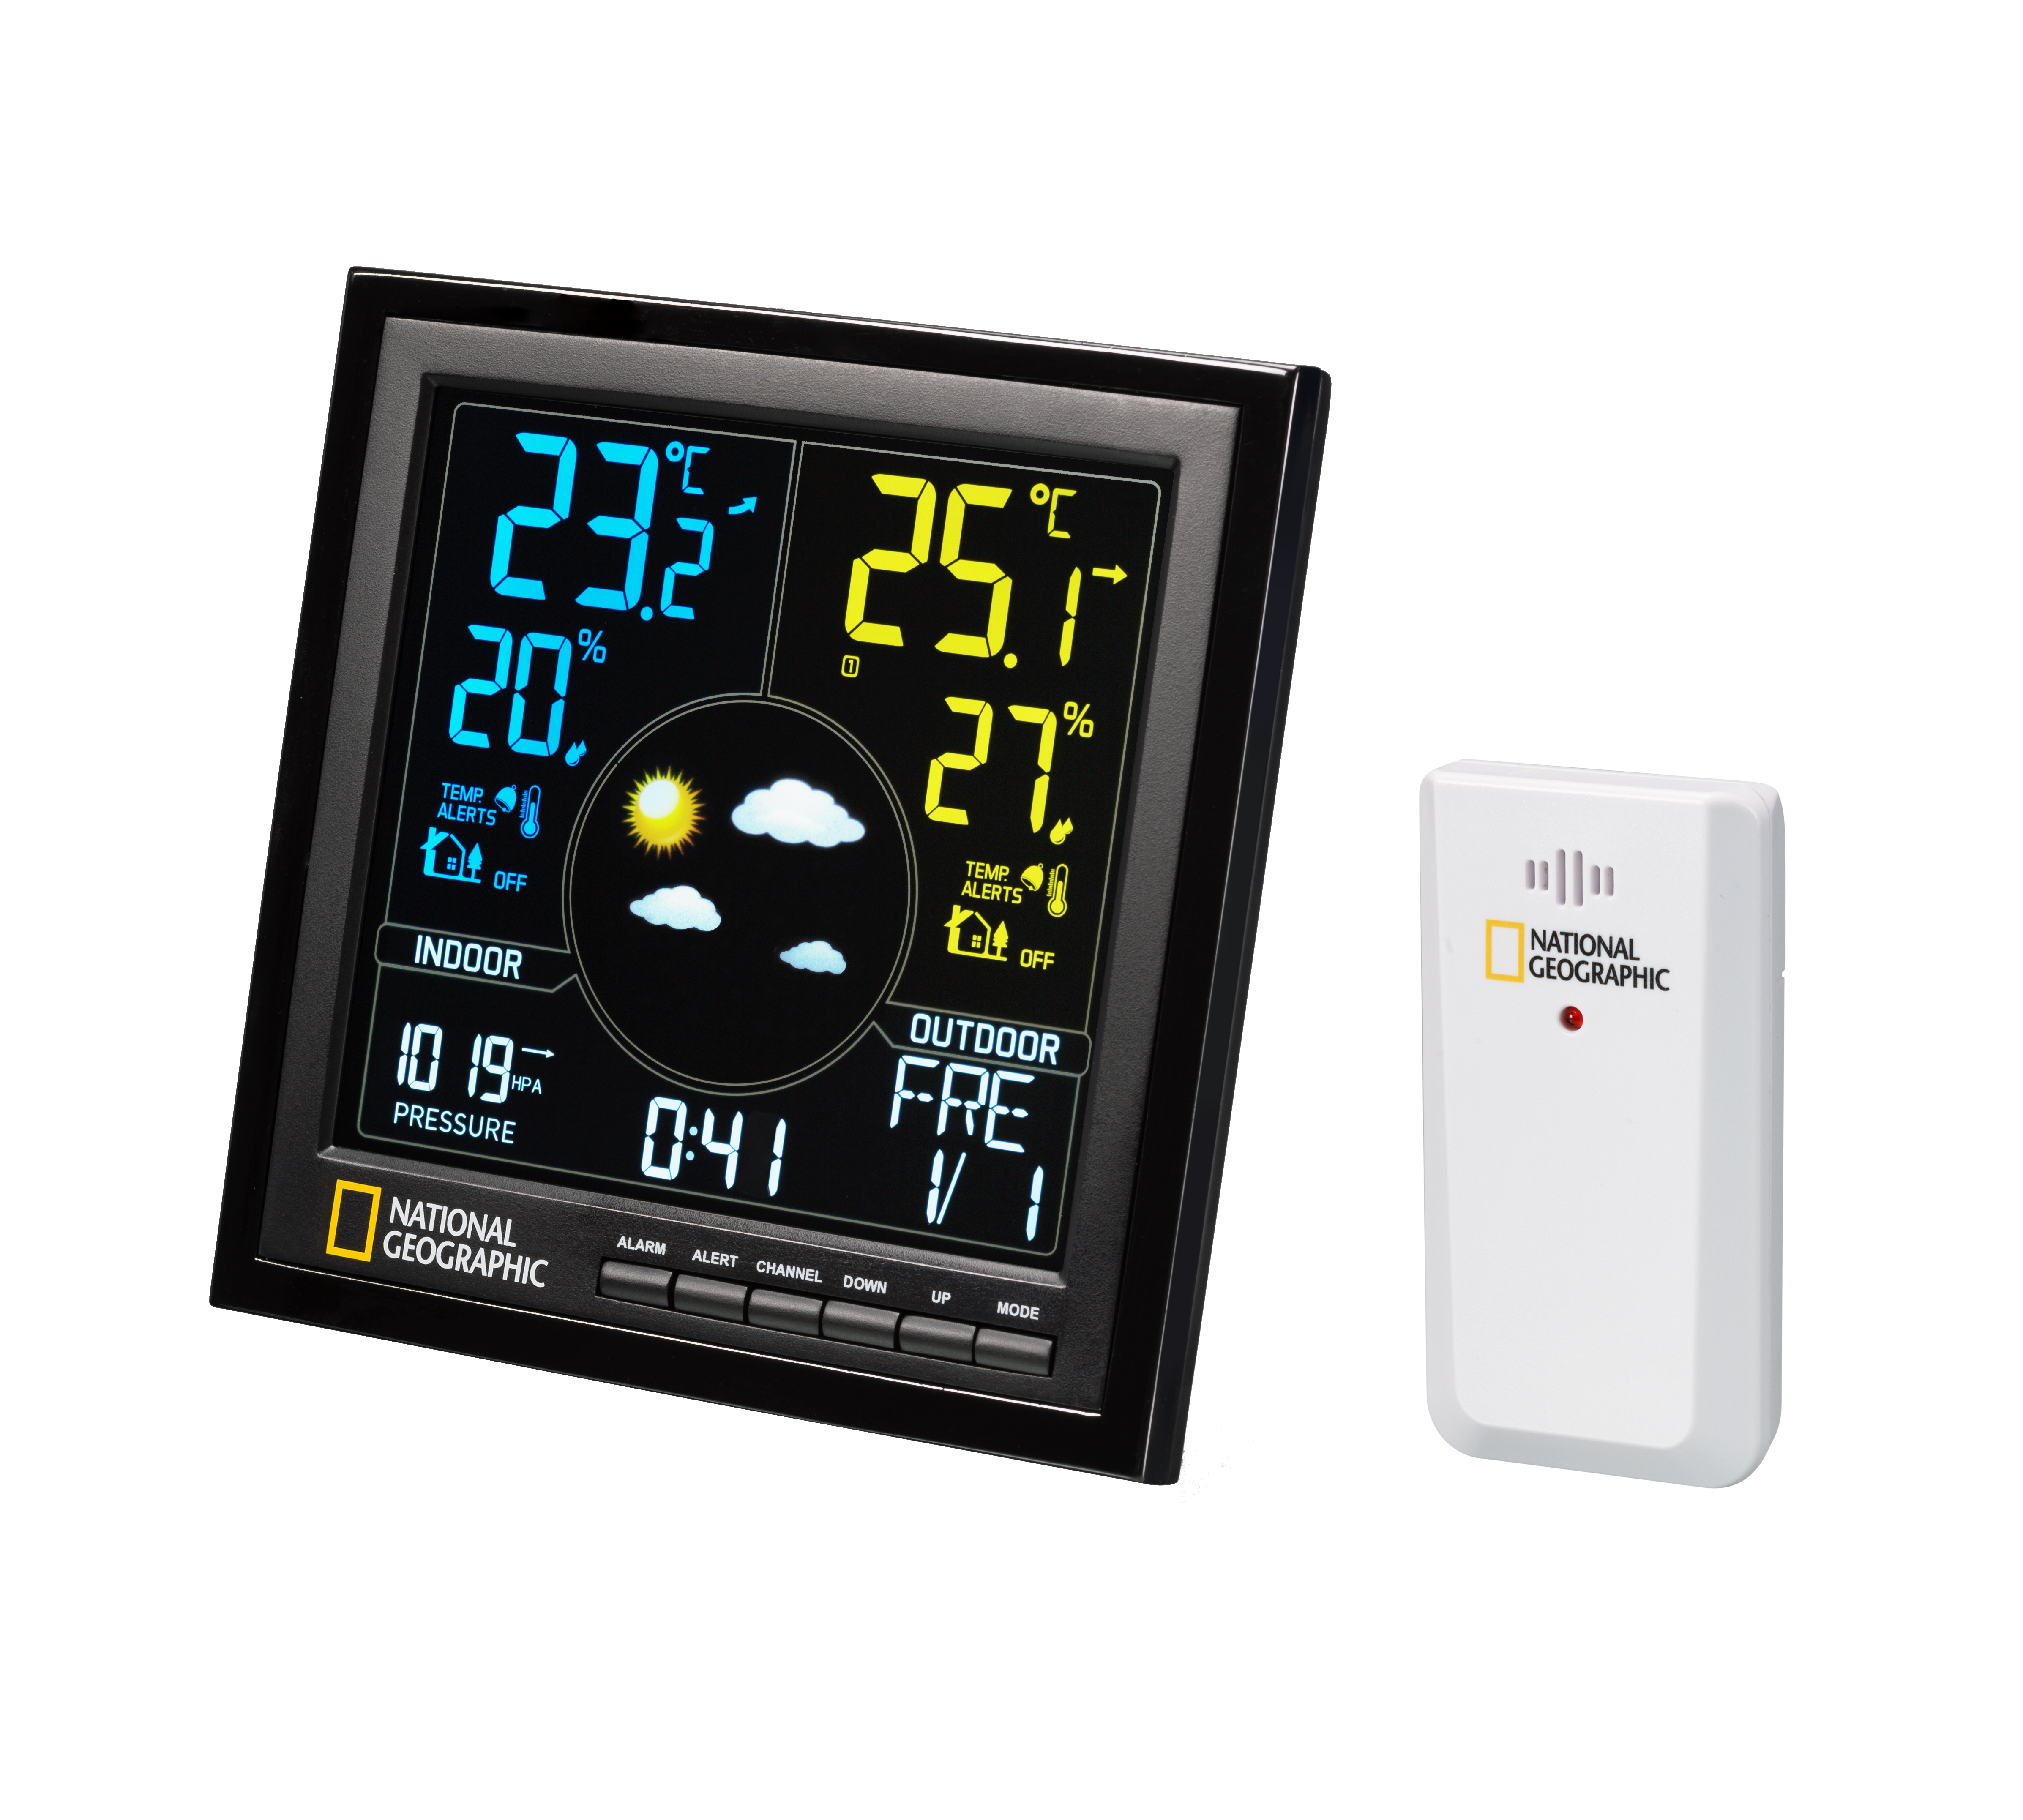 NATIONAL GEOGRAPHIC VA colour RC Weather Station (Refurbished)